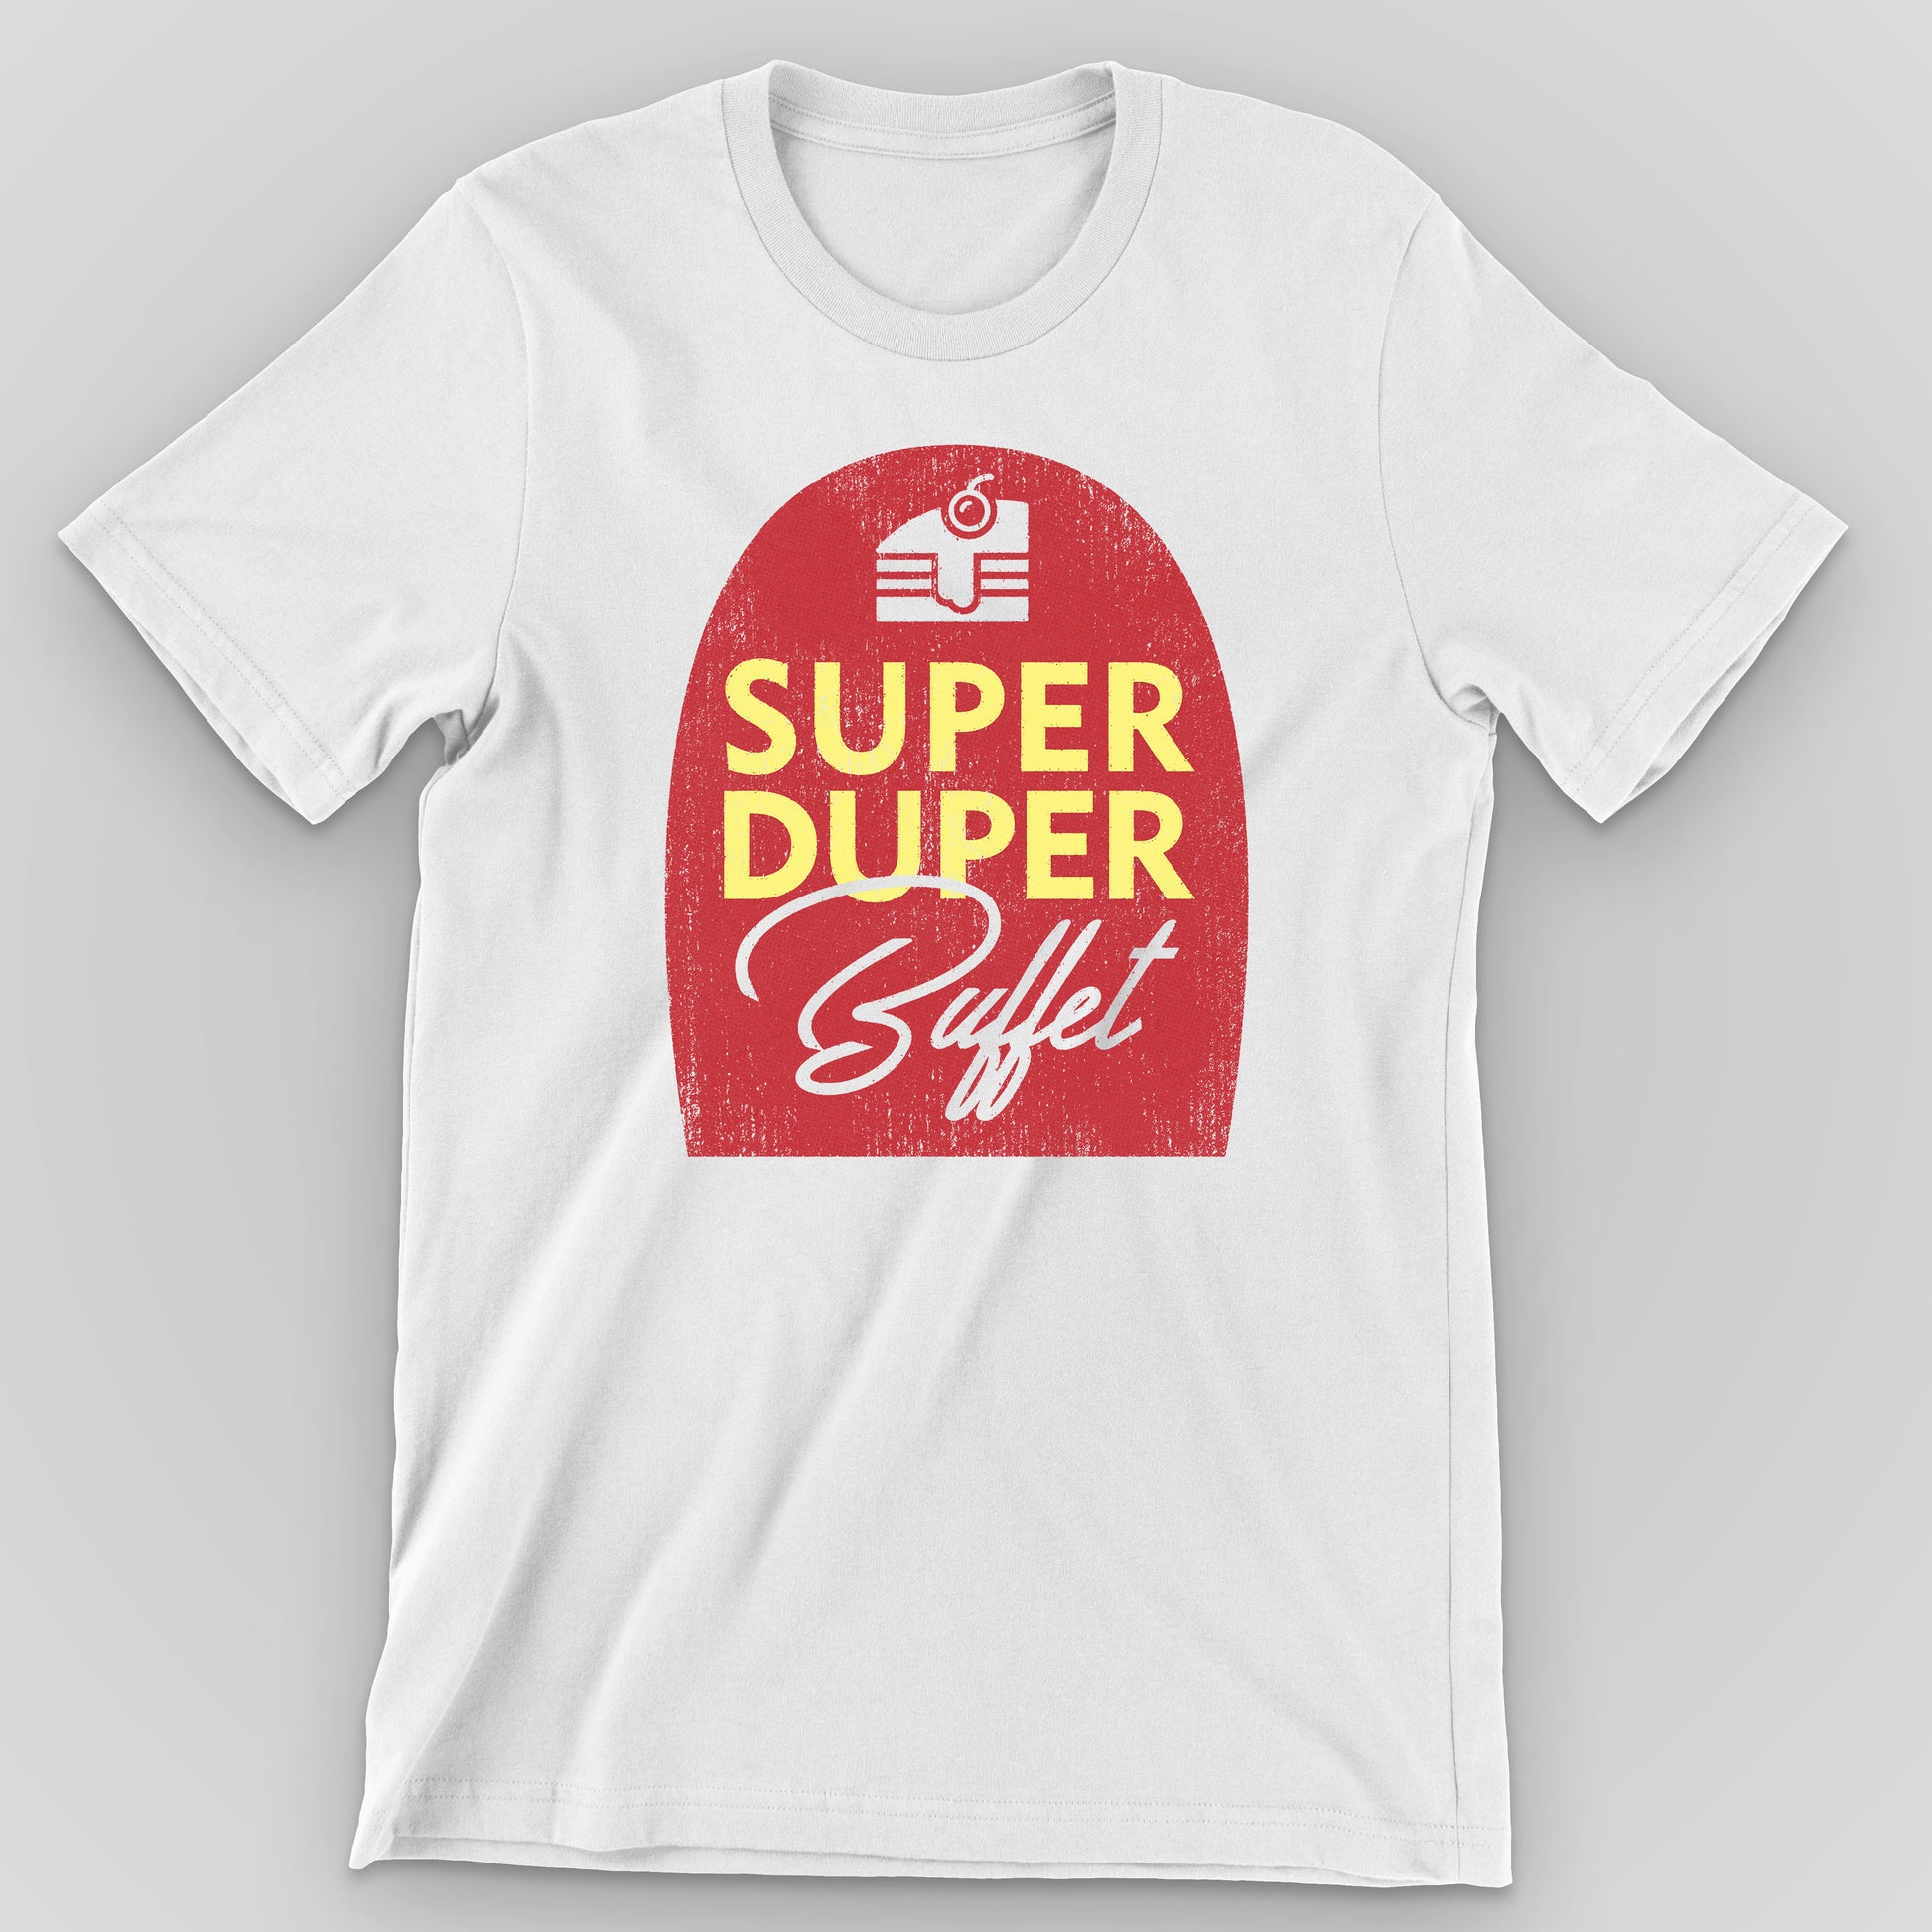 White Super Duper Buffet Graphic T-Shirt by Snaxtime